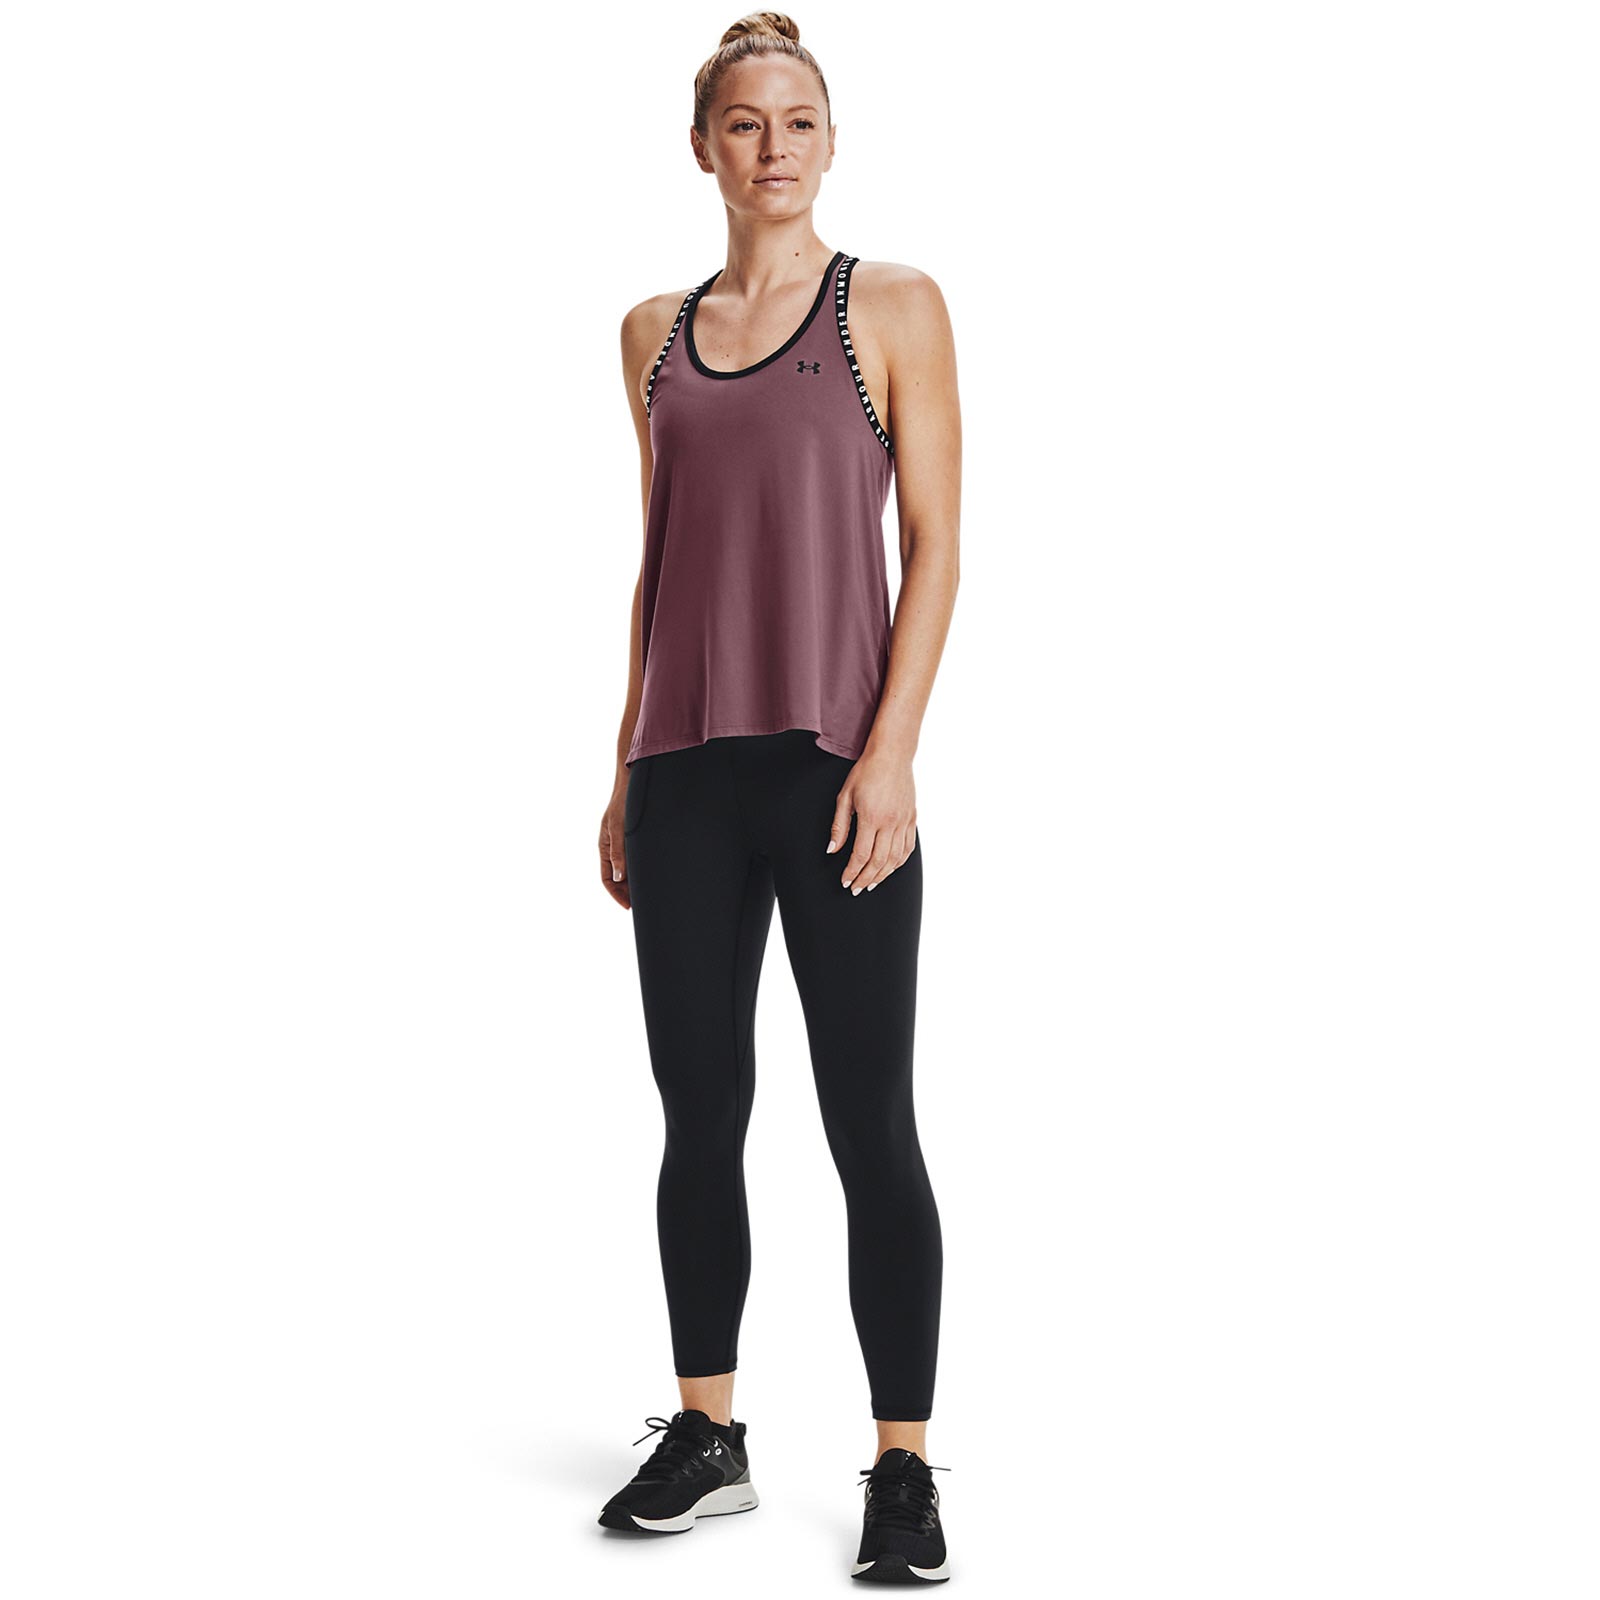 UNDER ARMOUR WOMENS KNOCKOUT TANK TOP PURPLE